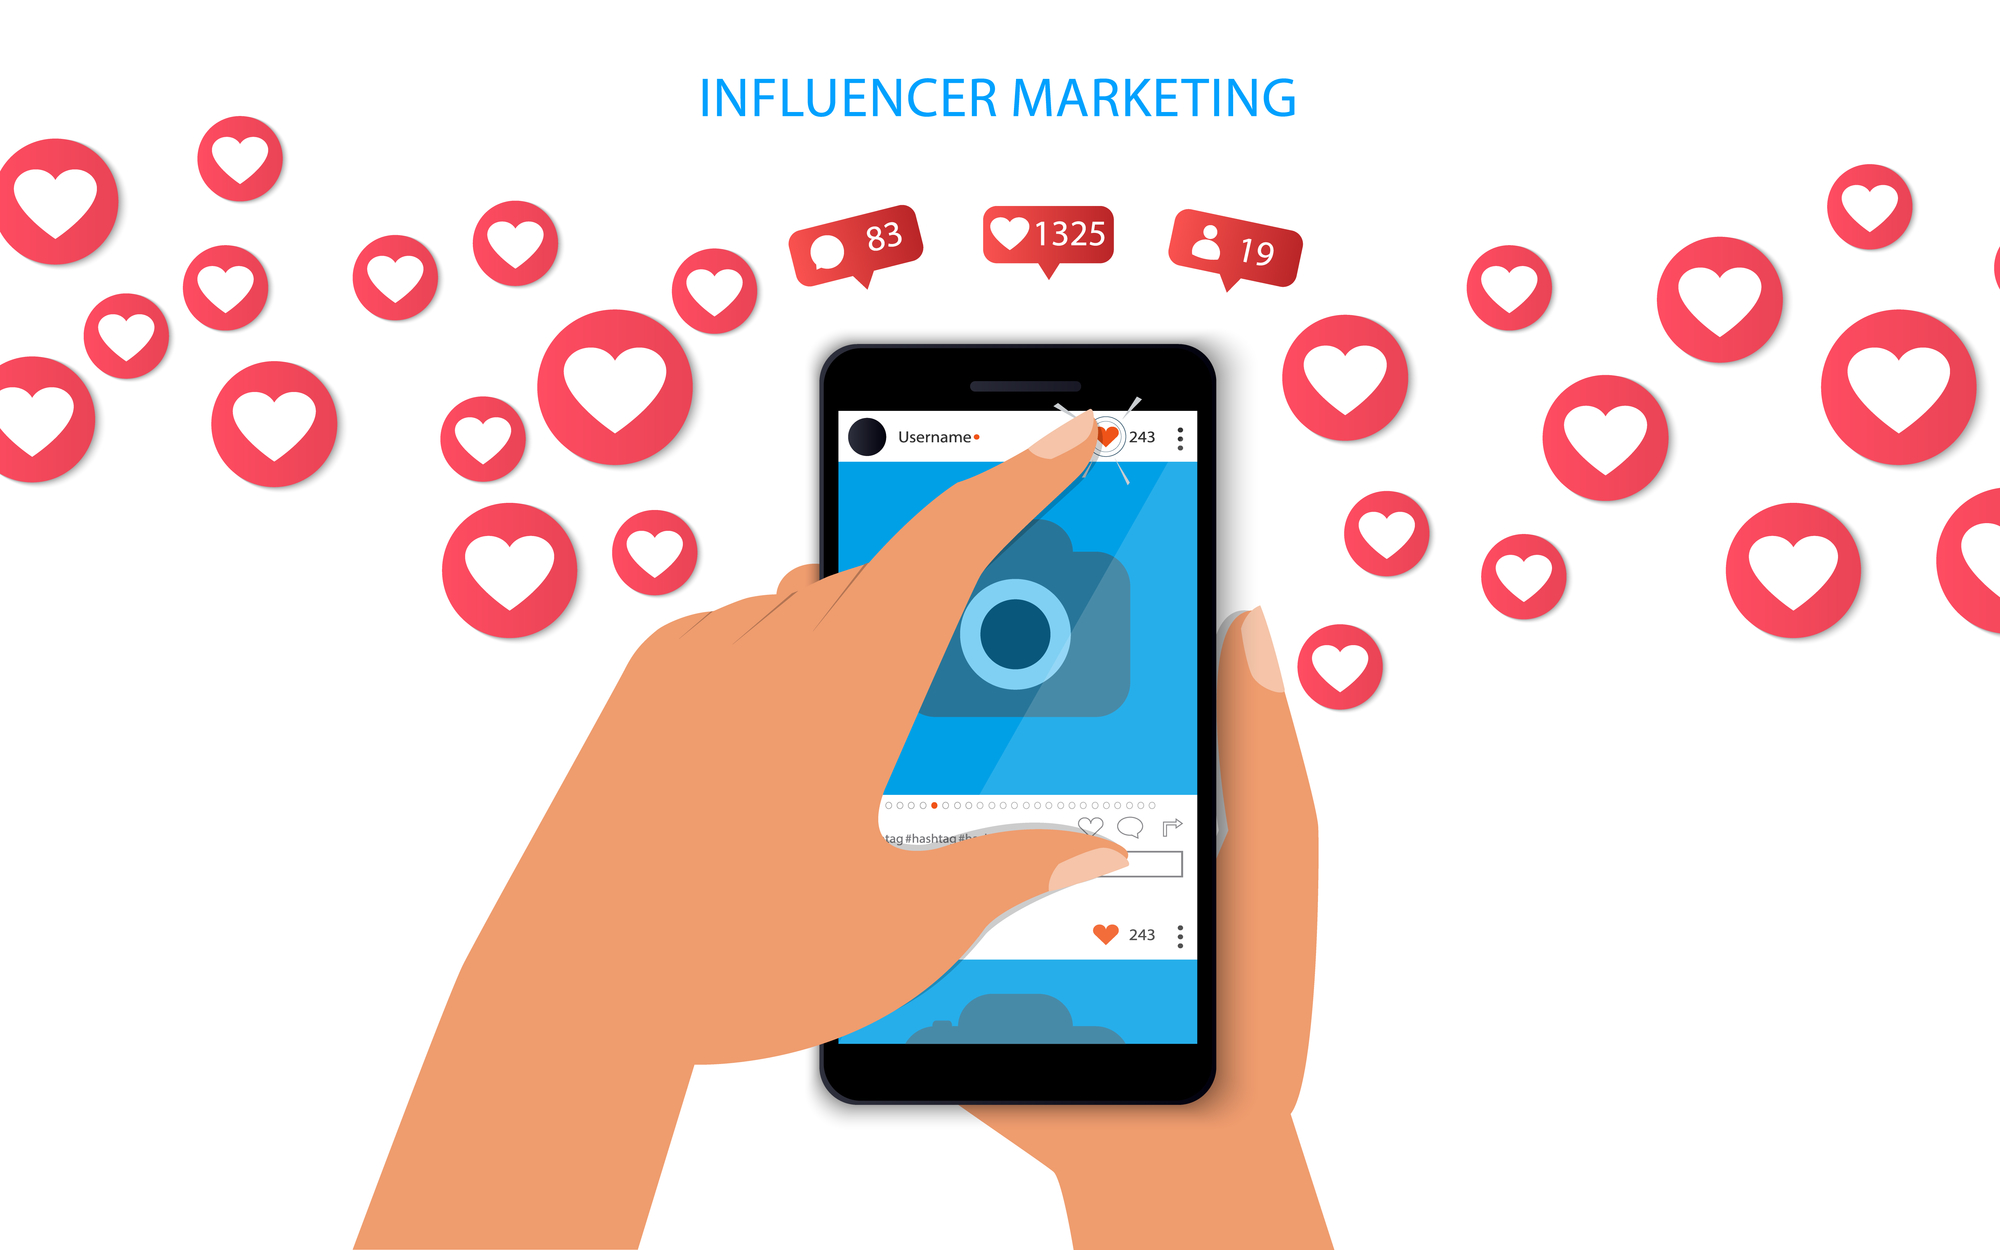 Influencer Marketing: 10 Top Mistakes Brands Make and How to Fix Them